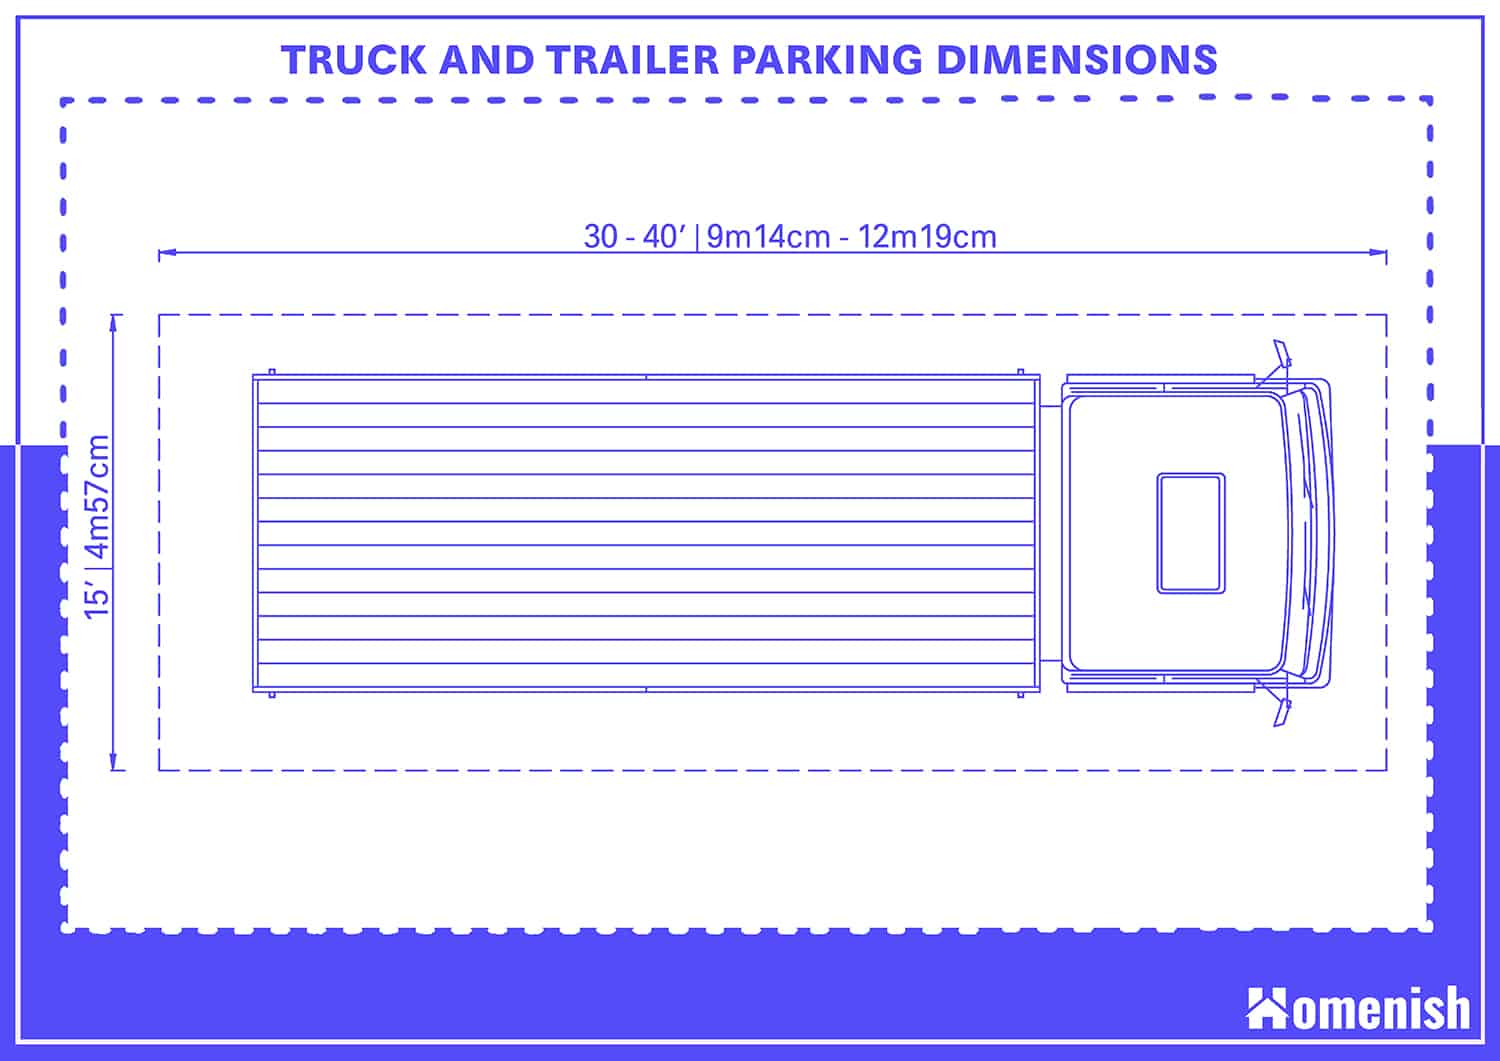 Truck and Trailer Parking